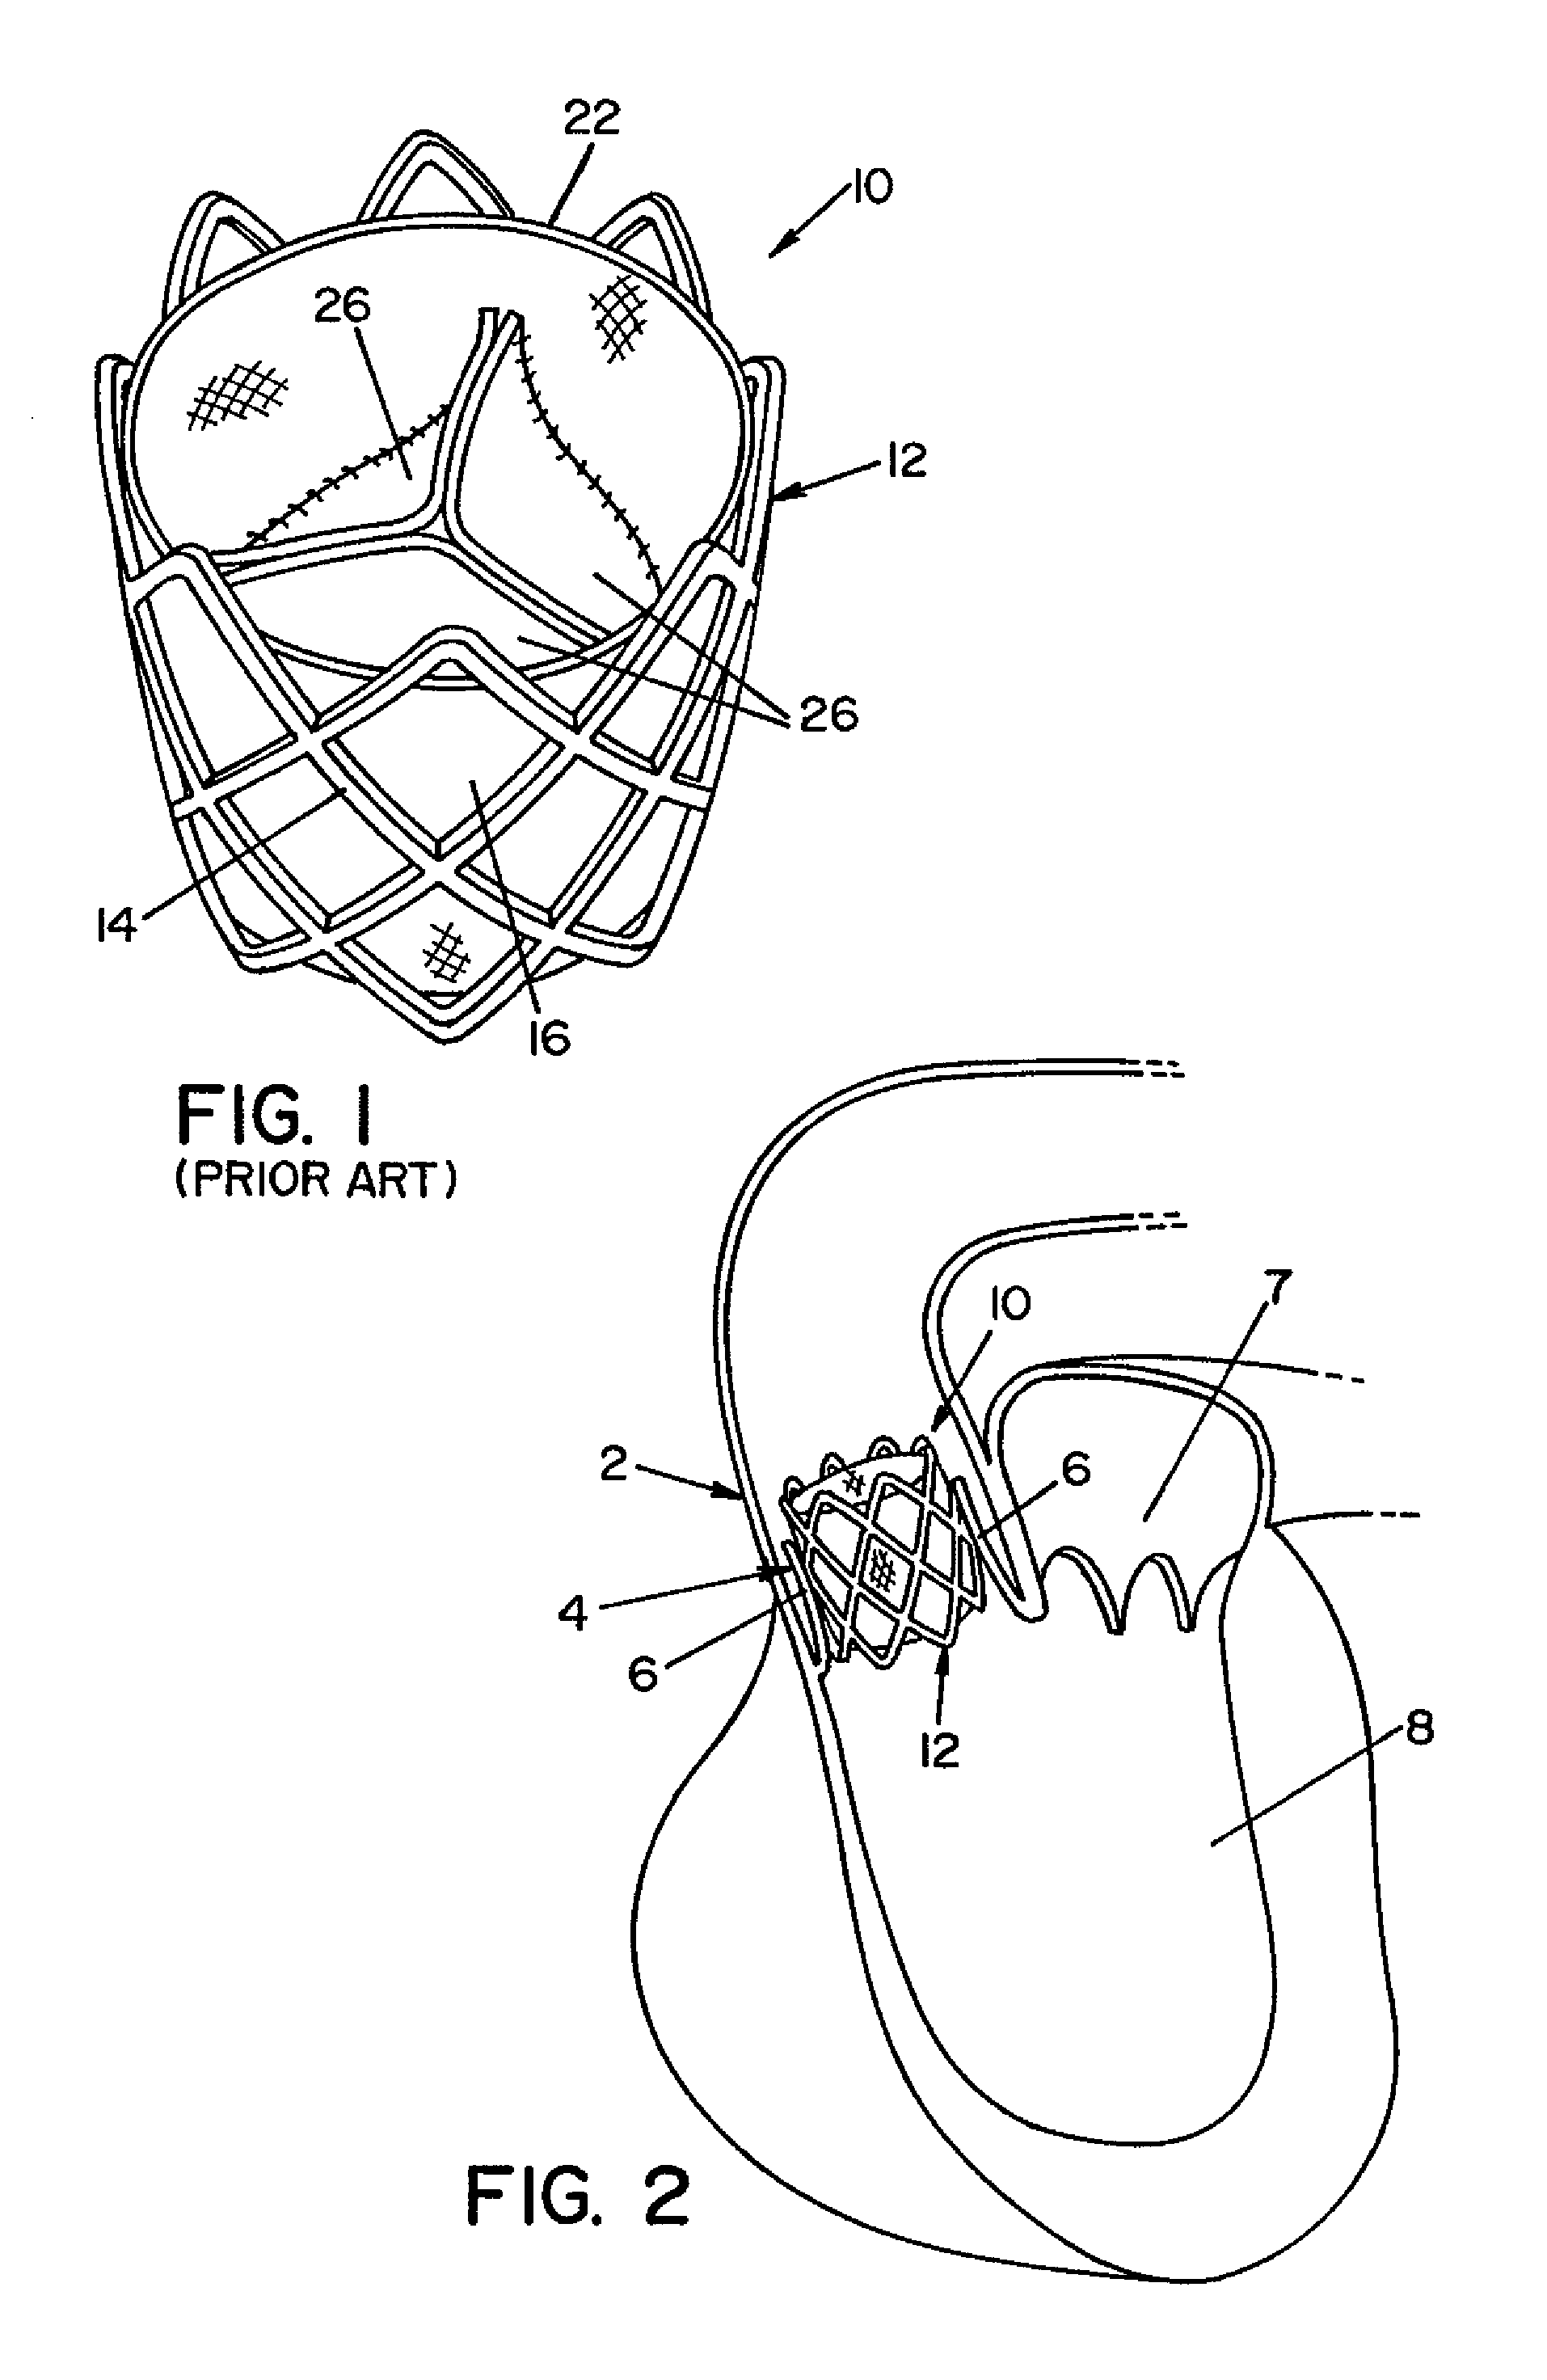 Method and apparatus for prosthetic valve removal